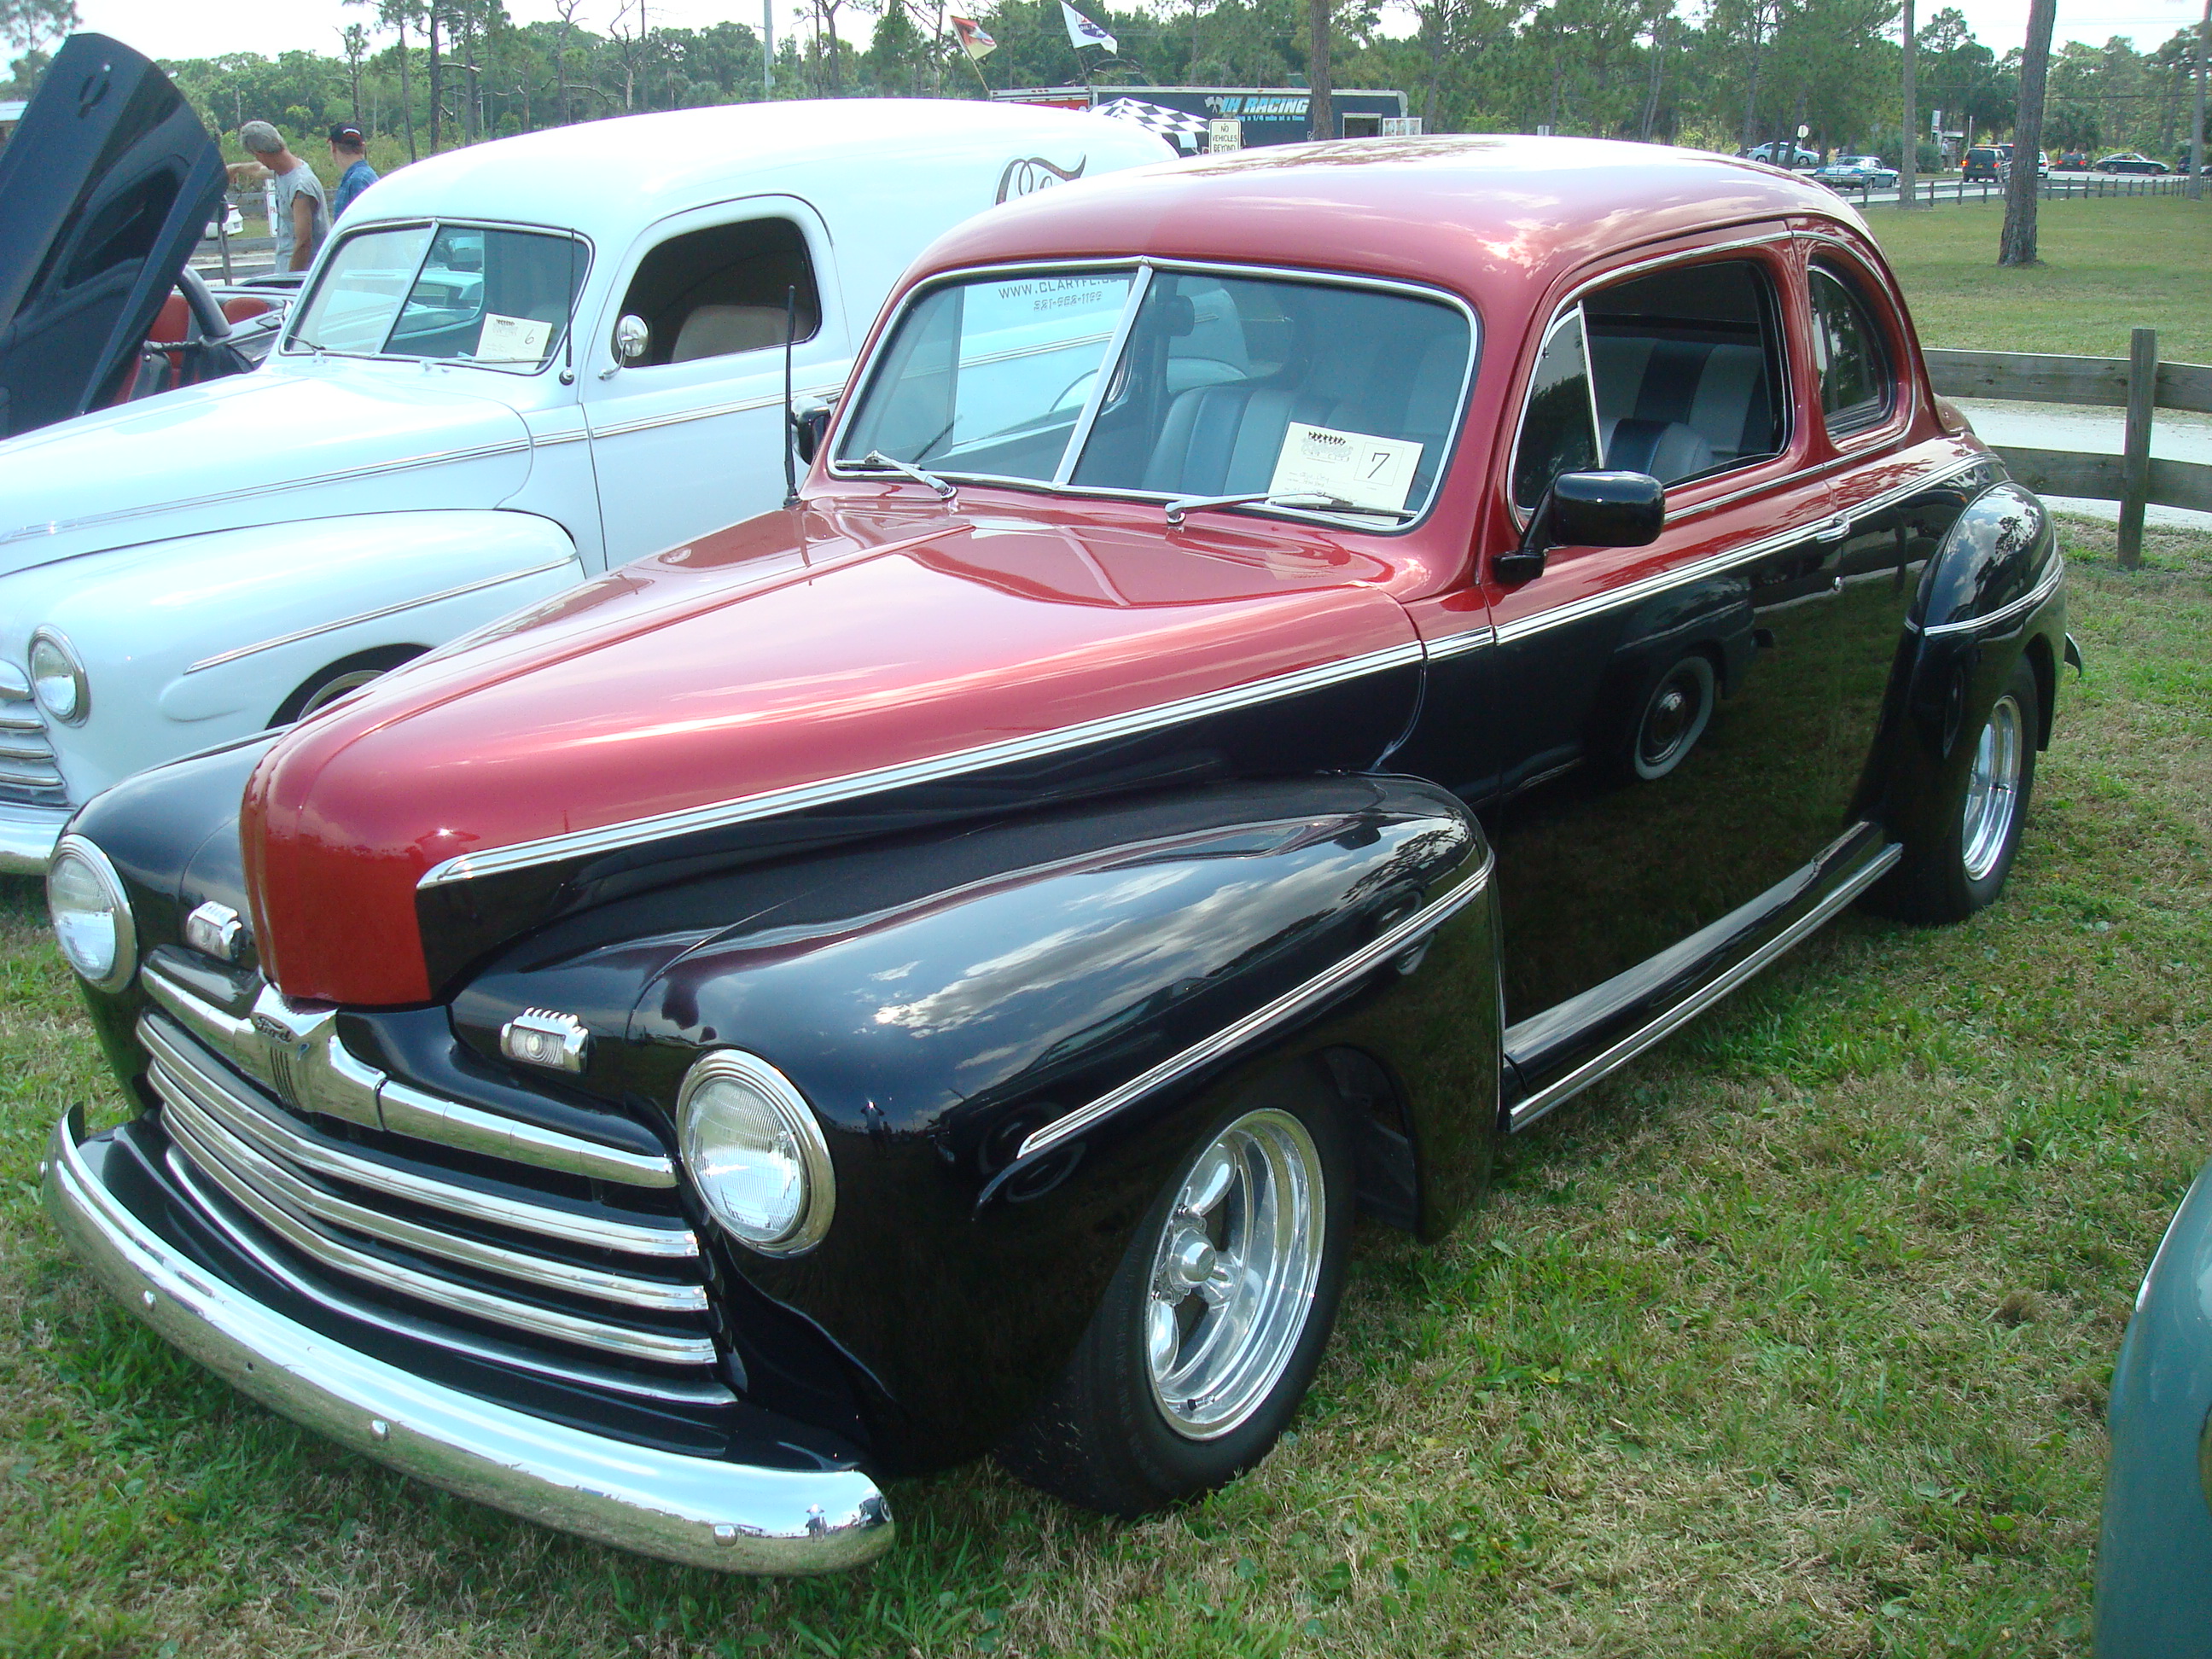 Steve's 1946 Ford Coupe